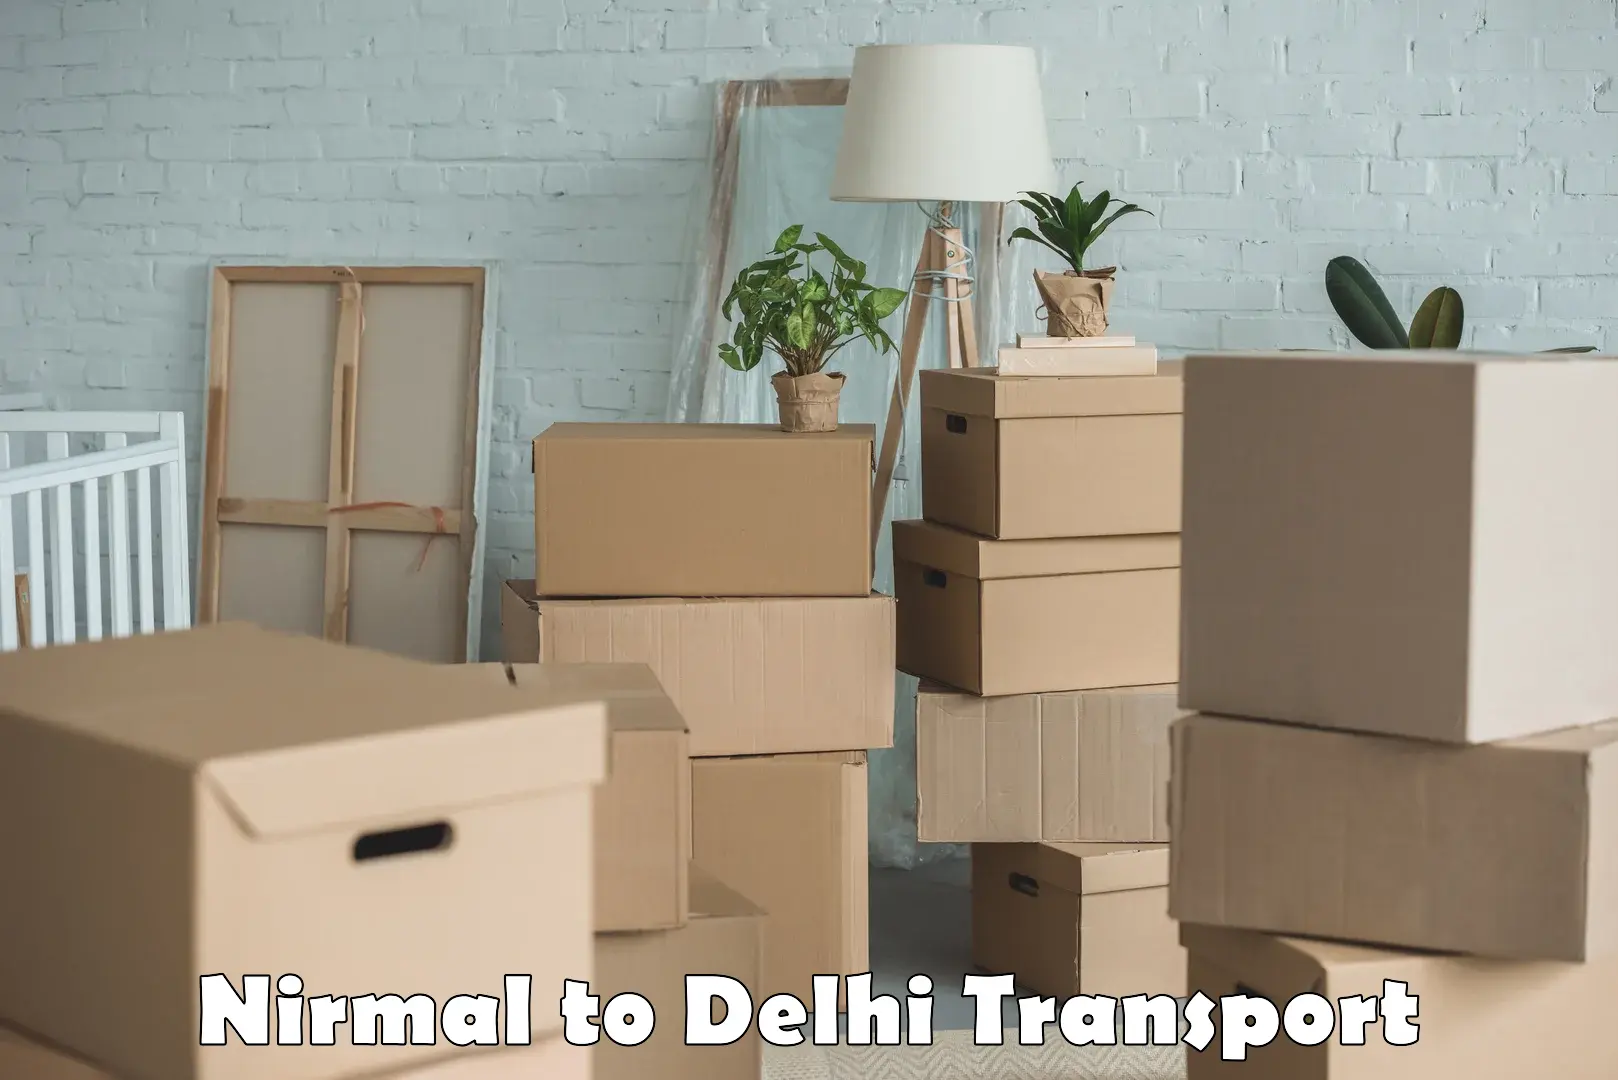 Container transport service Nirmal to East Delhi